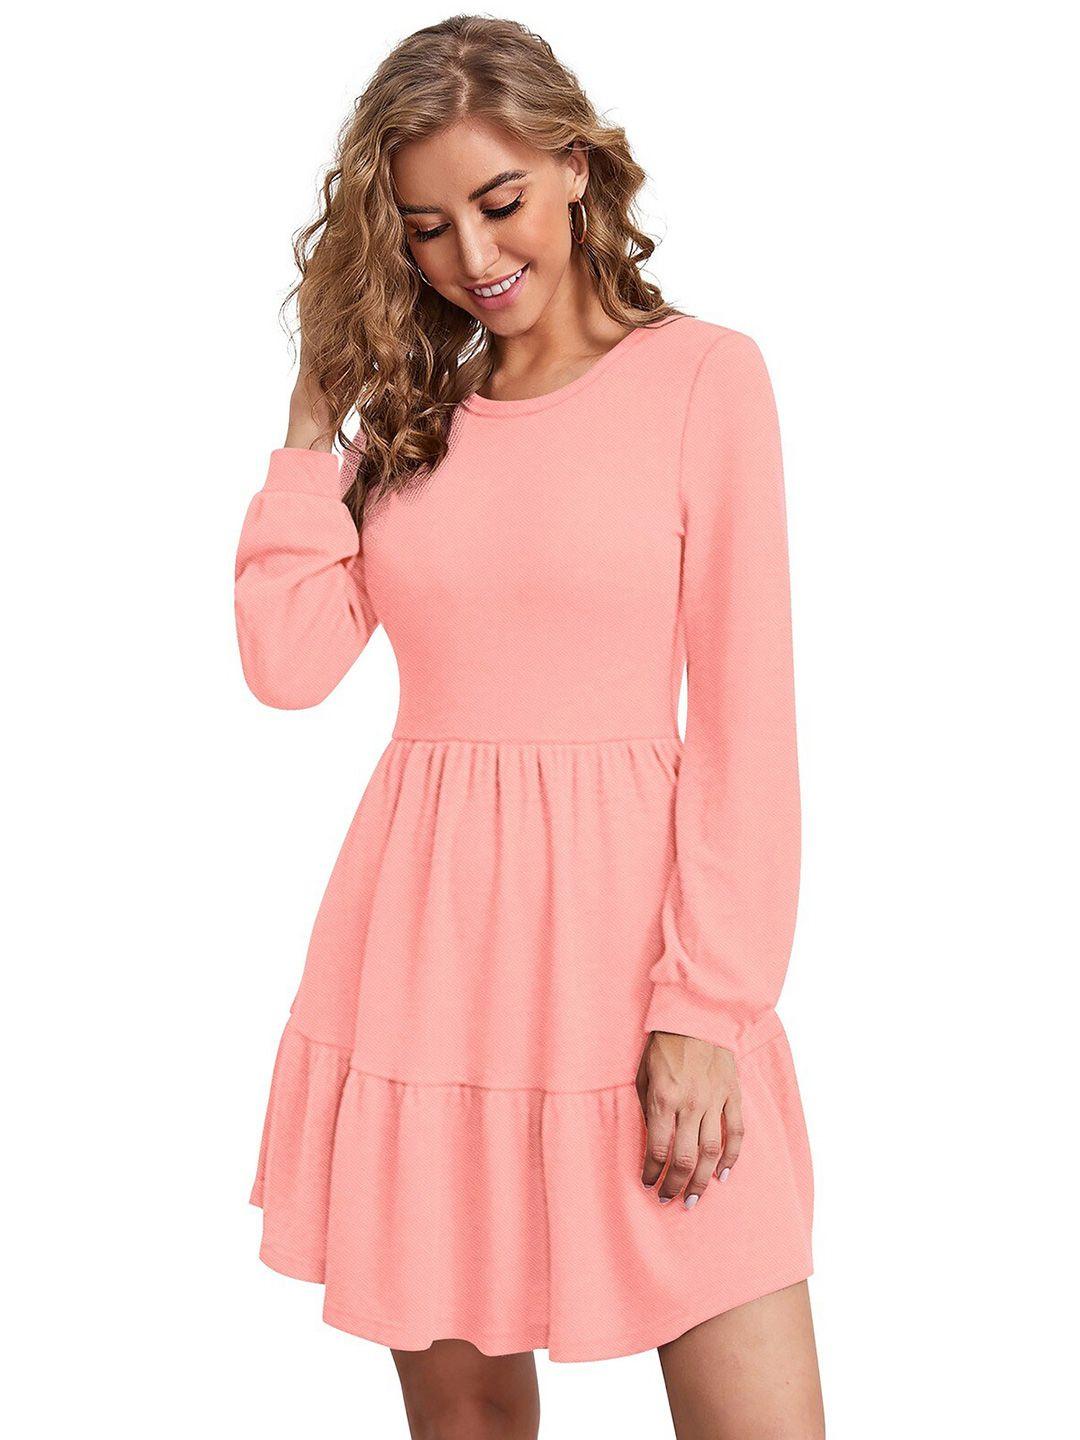 odette cuffed sleeves fit & flare acrylic dress